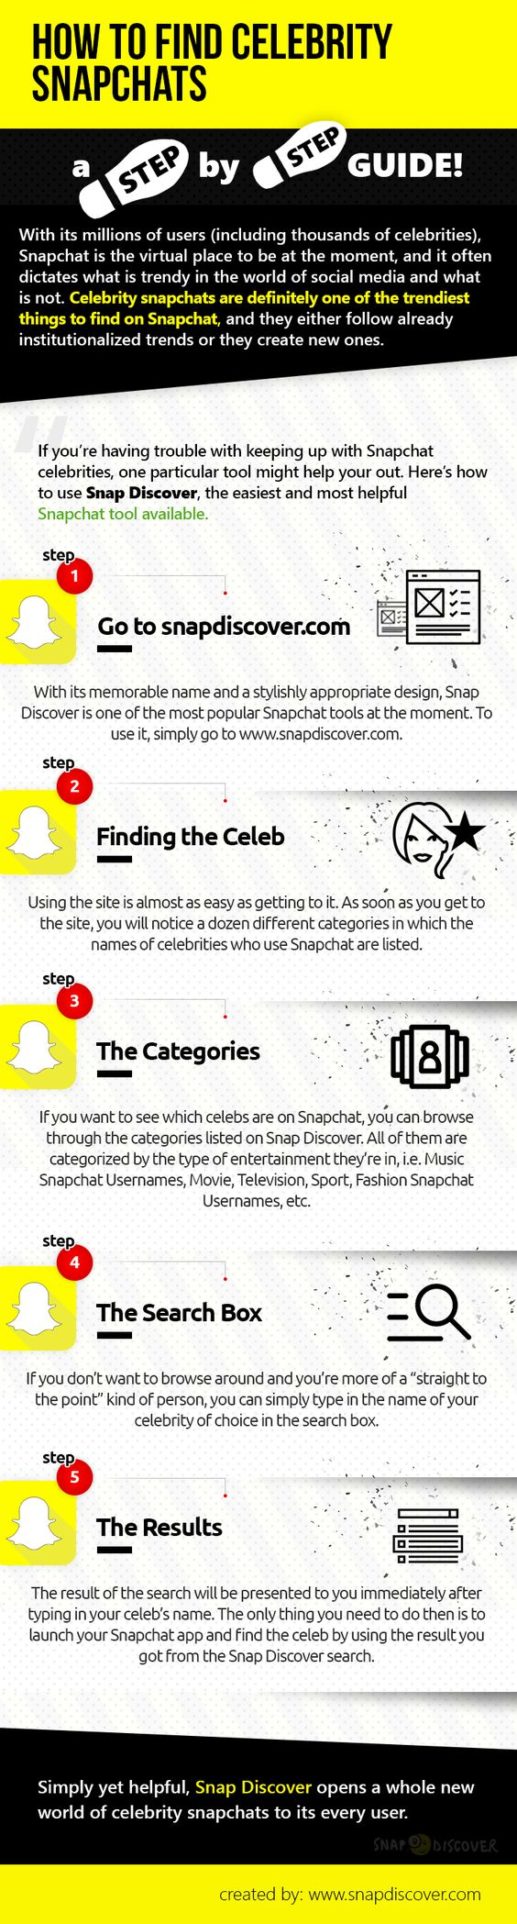 How To Find Celebrity Snapchats (A Step By Step Guide)